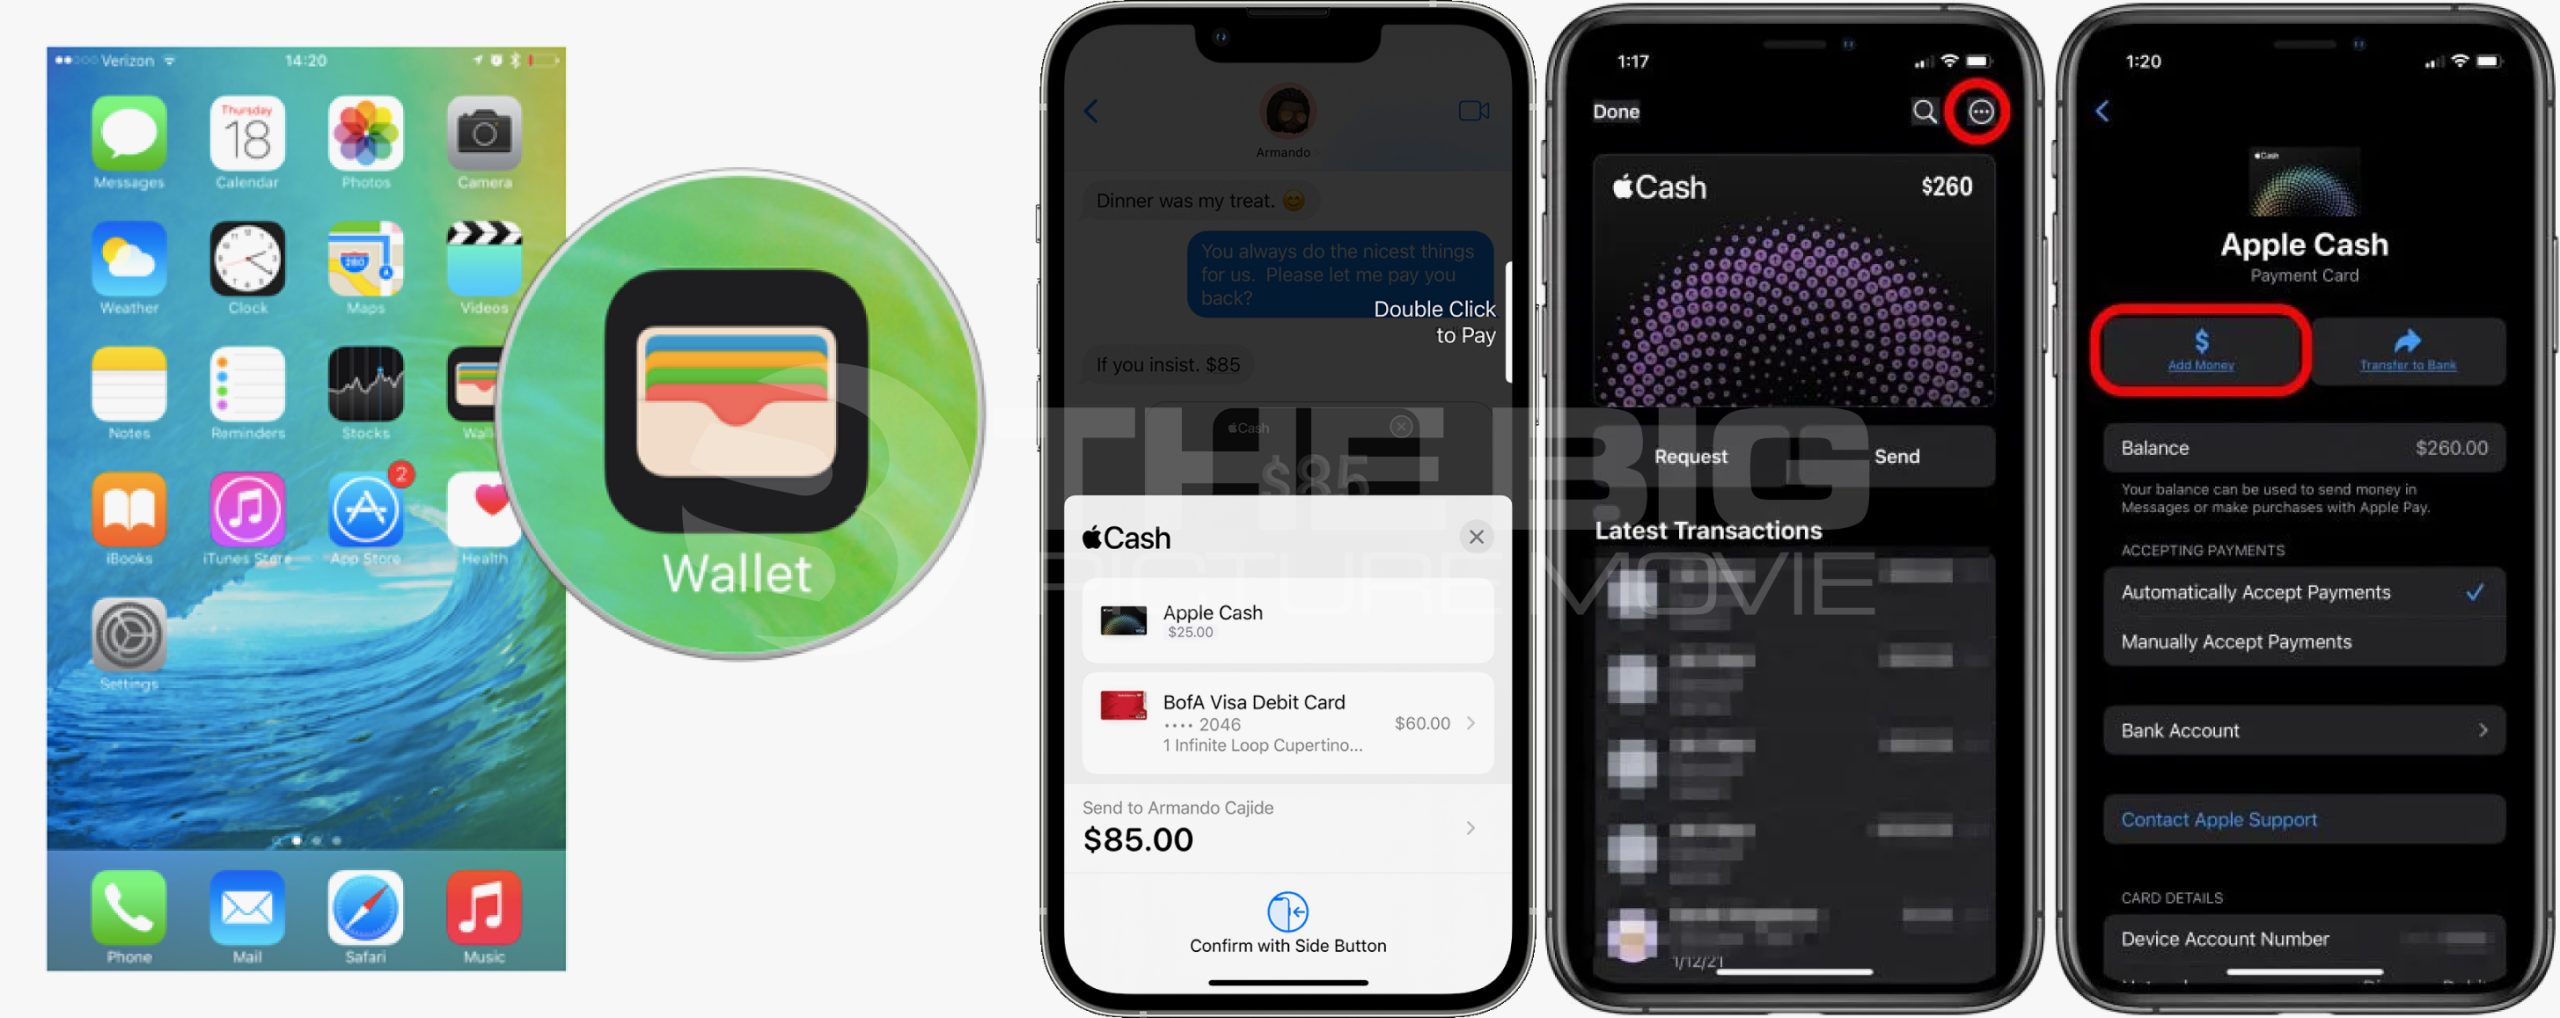 Add money to apple pay without credit card